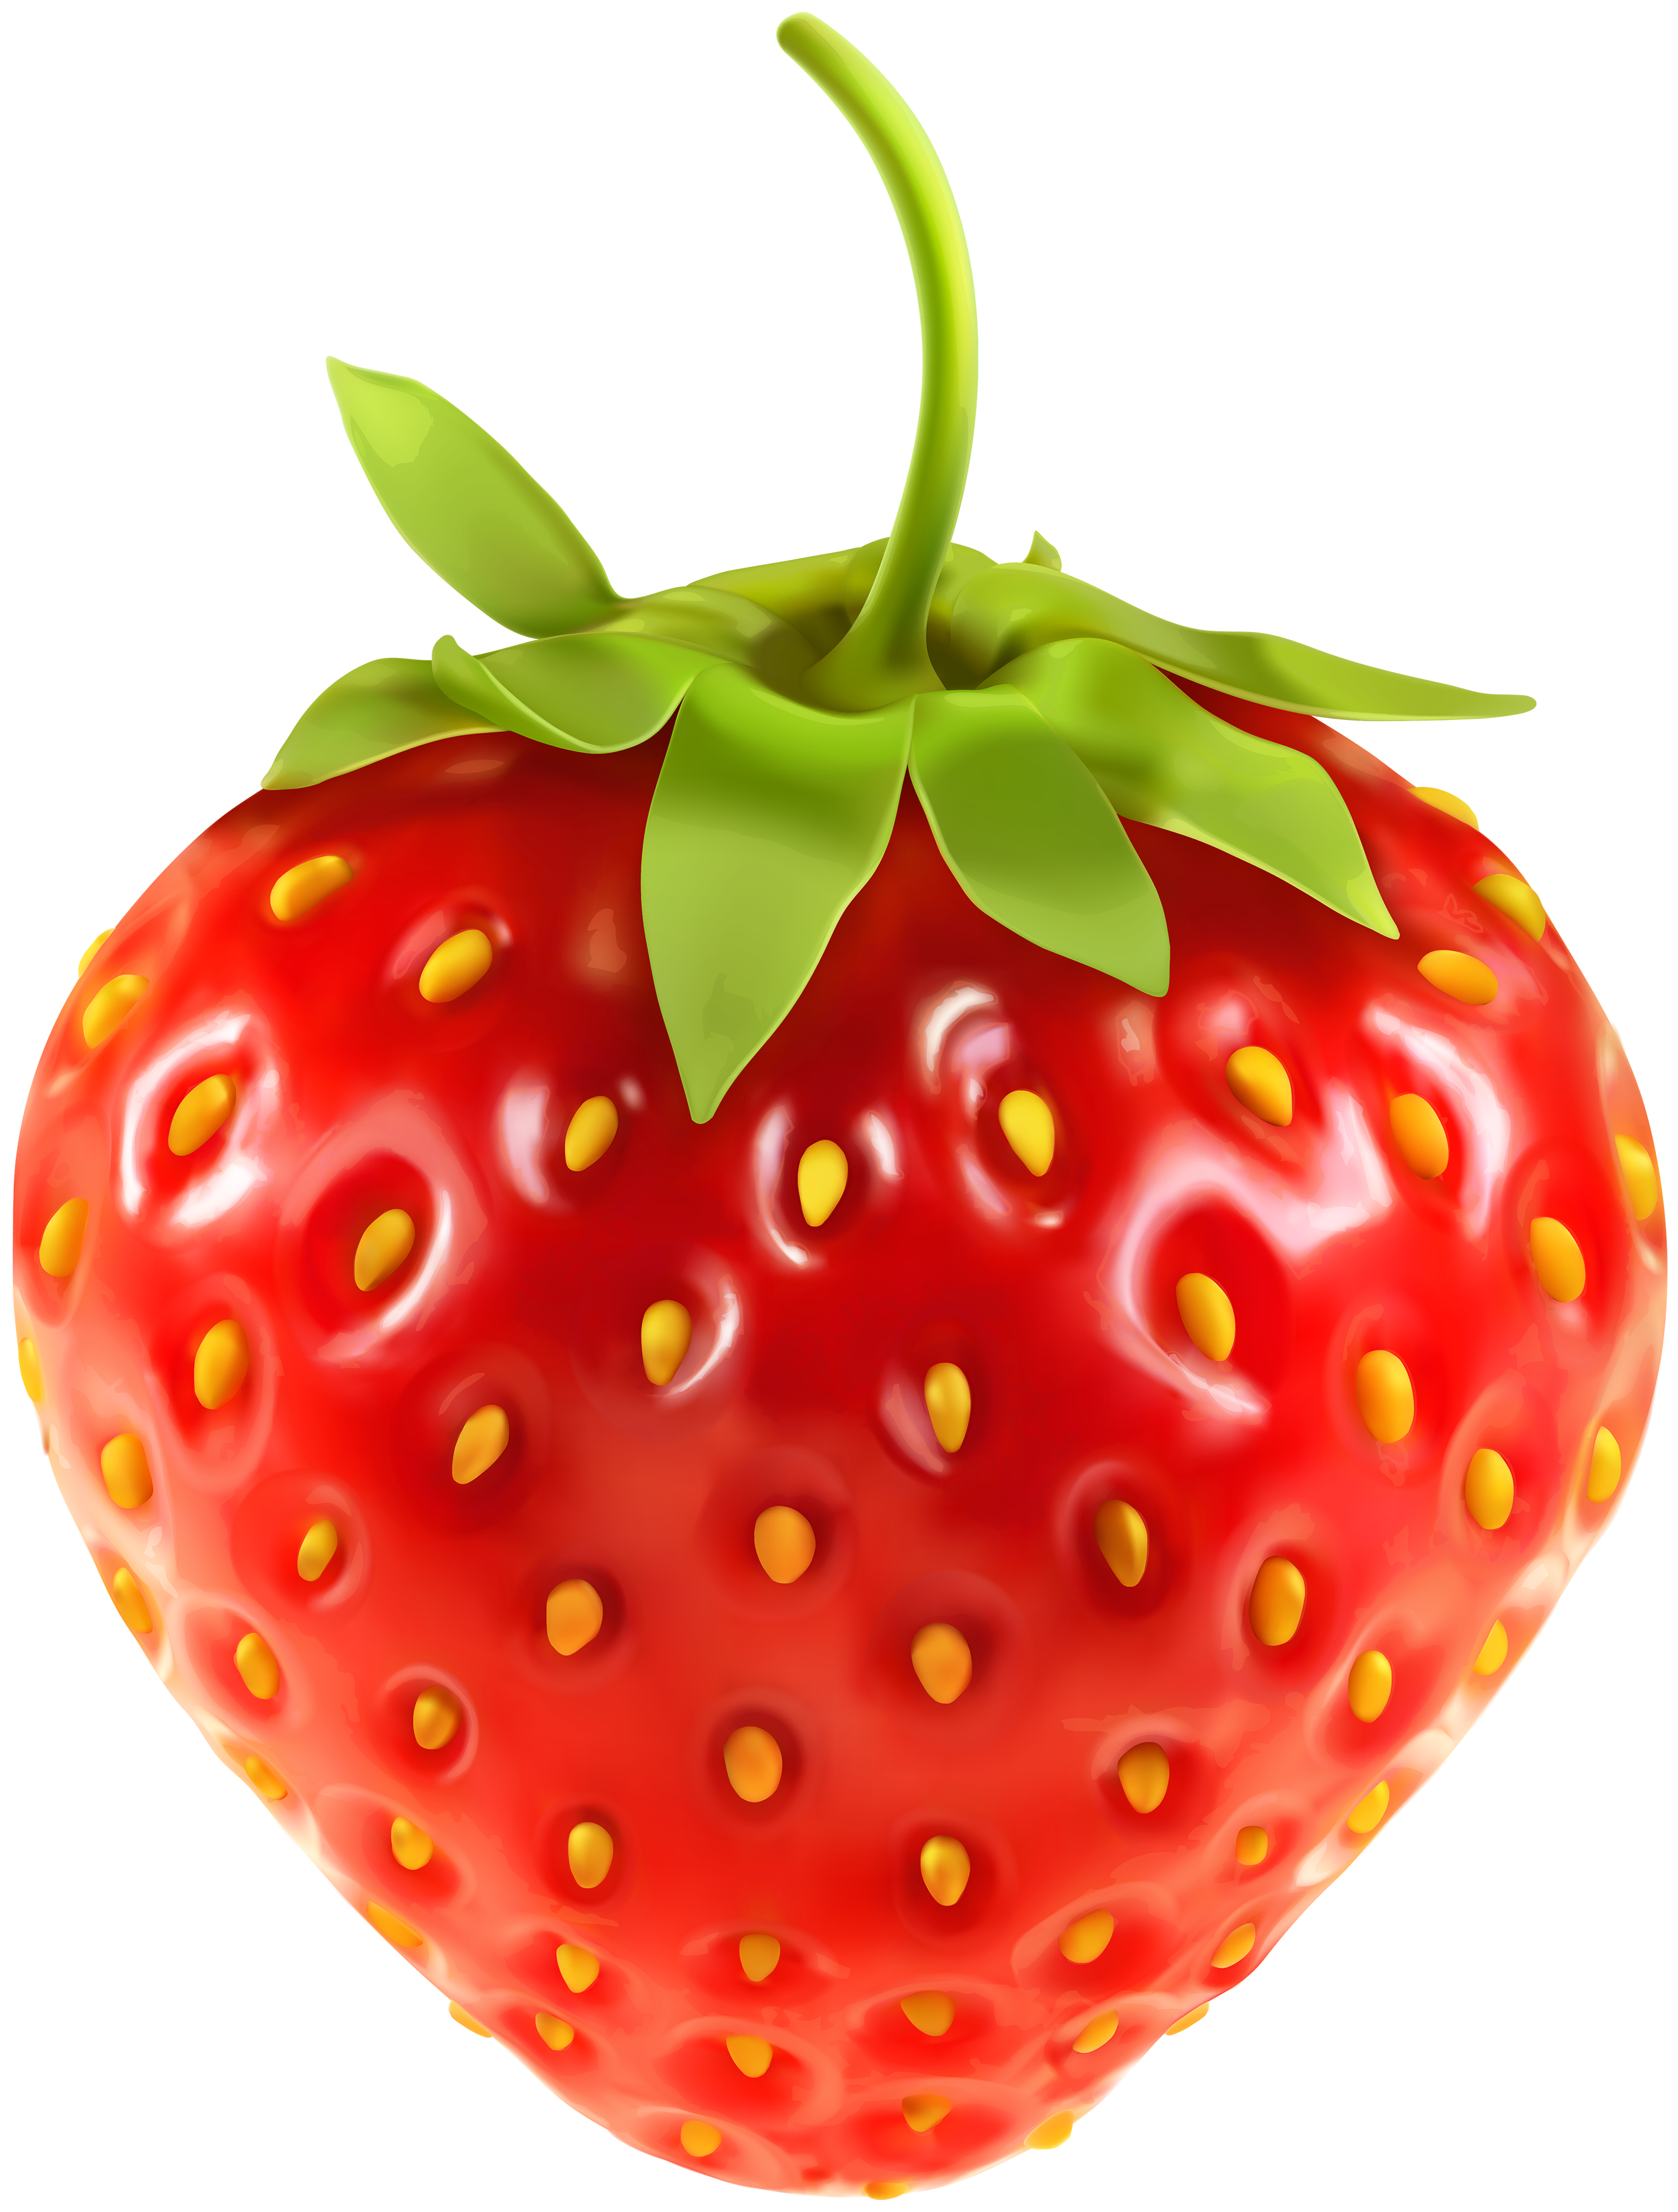 Strawberry clipart strawberry fruit clip art downloadclipart